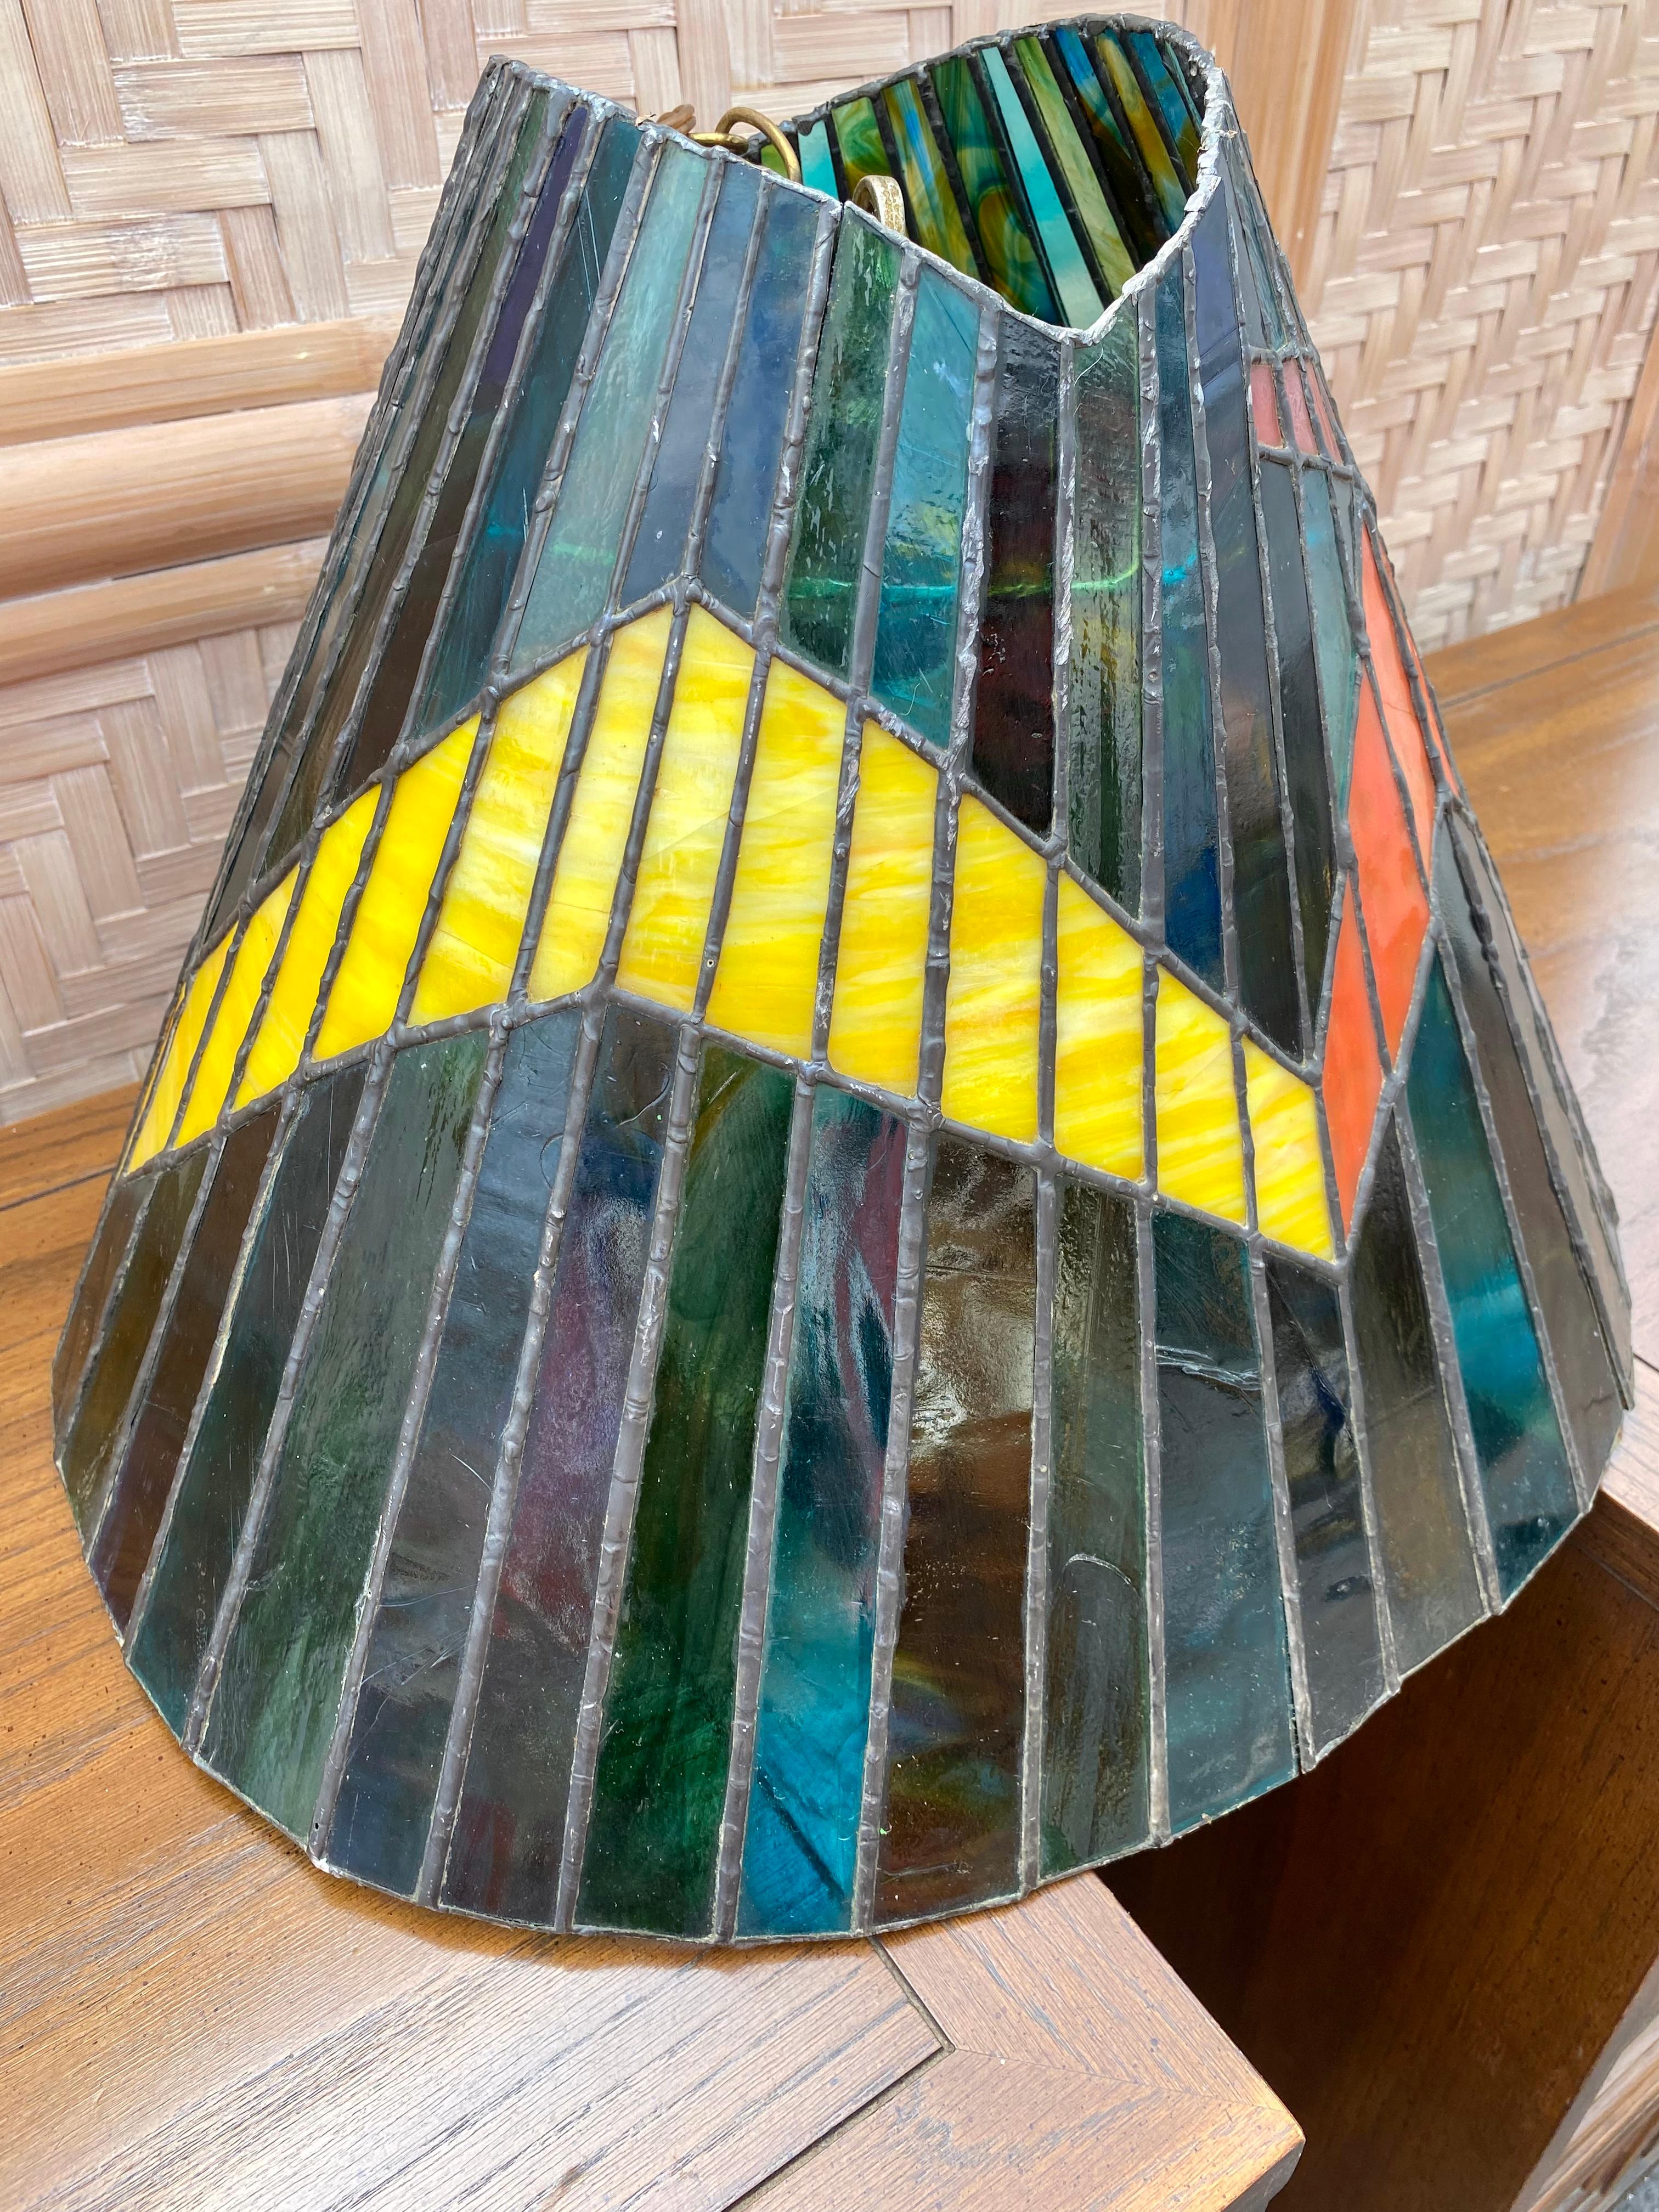 1960s Colorful Slag Glass Hanging Lamp Pendant  In Good Condition For Sale In Fort Lauderdale, FL